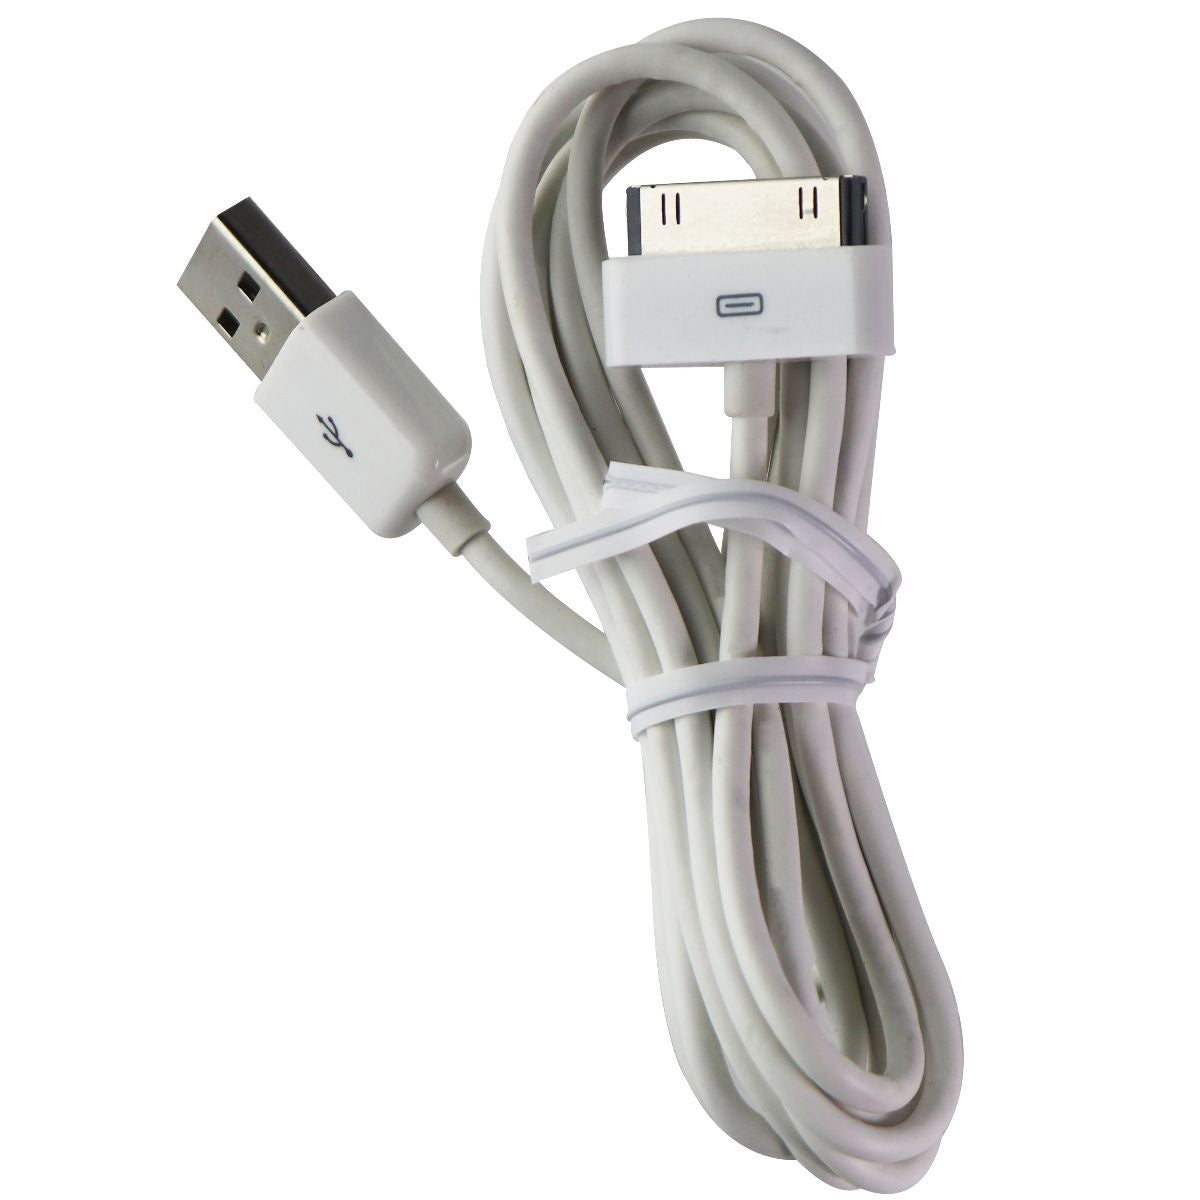 Miscellaneous/Mixed Charge and Sync USB Cables for 30-Pin Devices - White